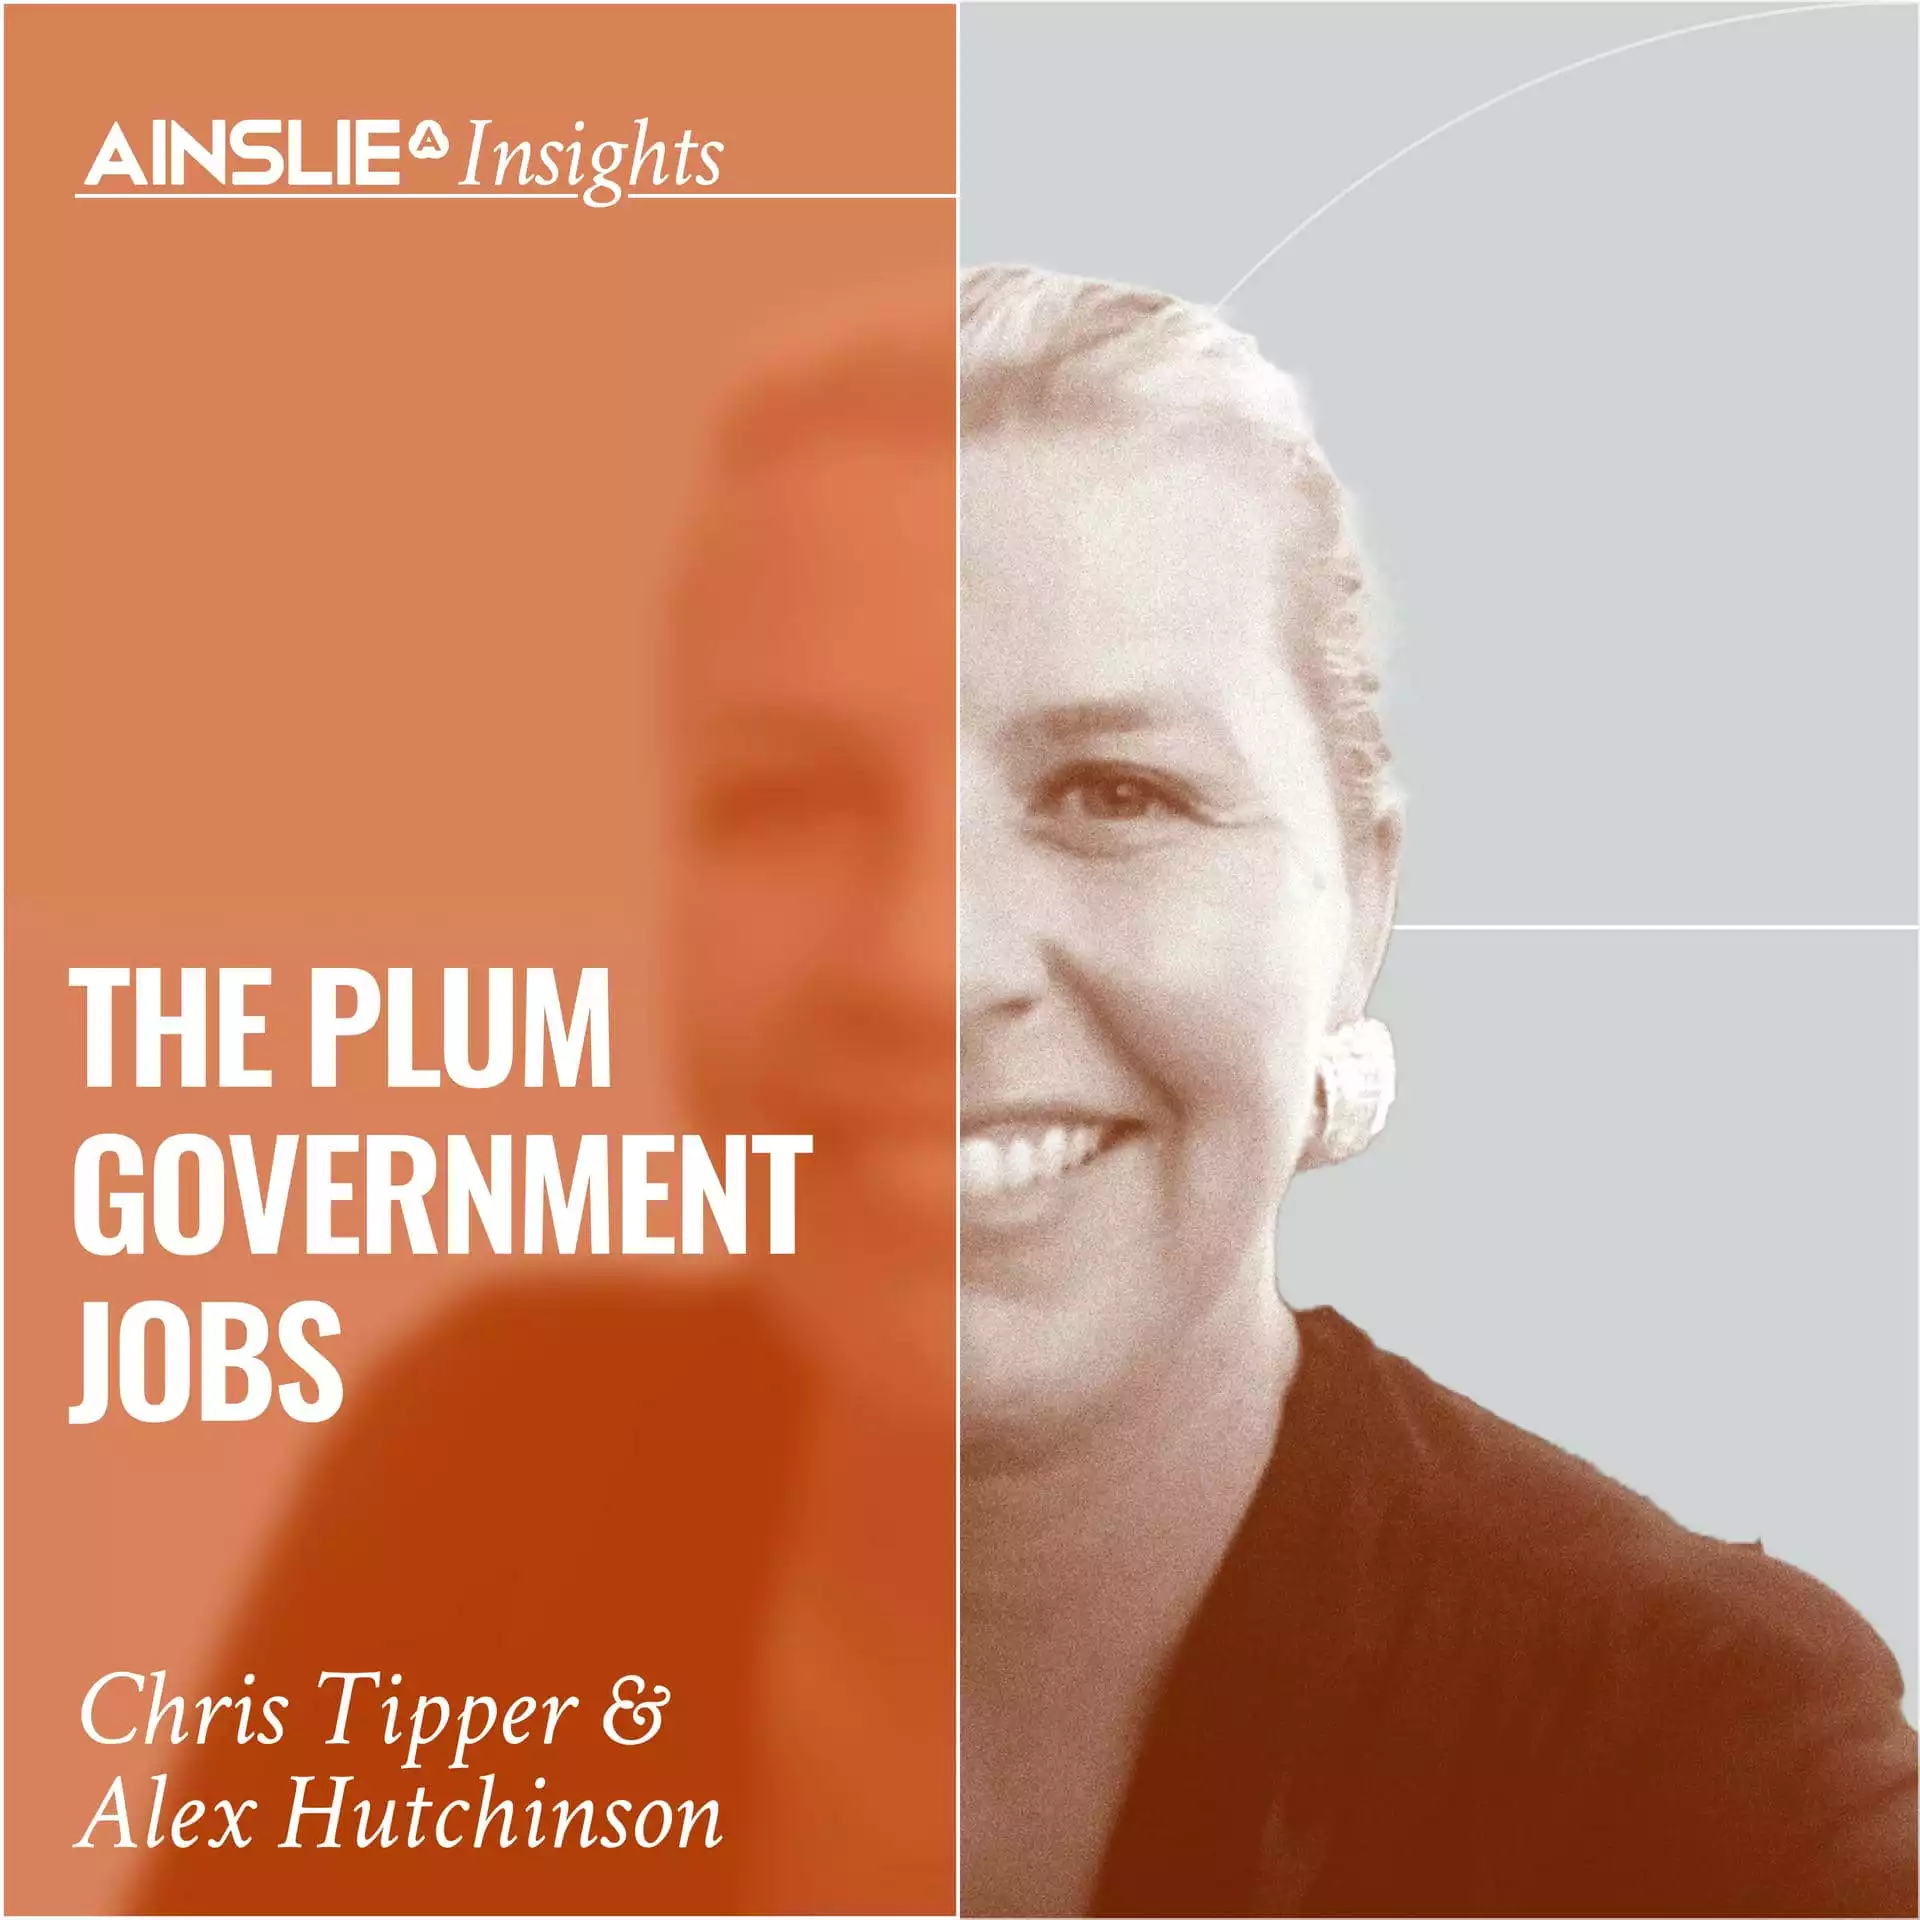 INSIGHTS: The Plum Government Jobs (and Their Friends with Benefits)